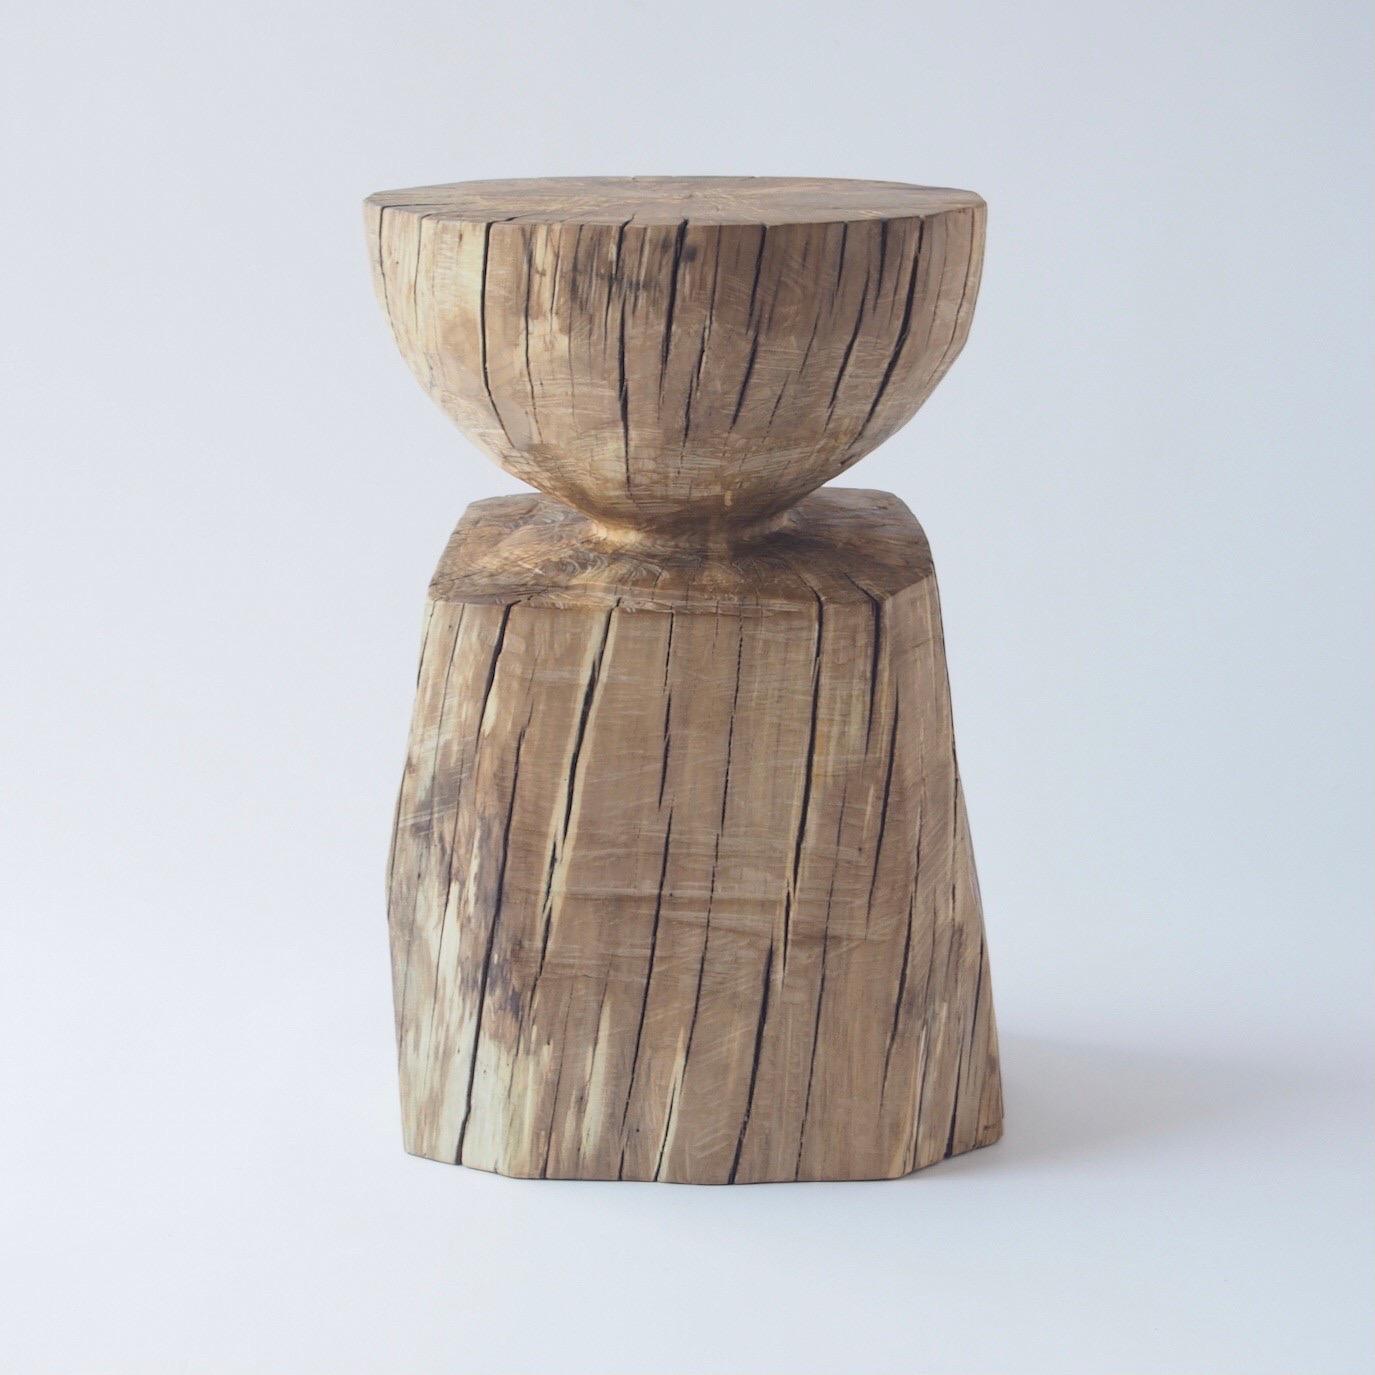 Hand-Carved Hiroyuki Nishimura and Zogei Furniture Sculptural Wood Stool11 Tribal Glamping For Sale